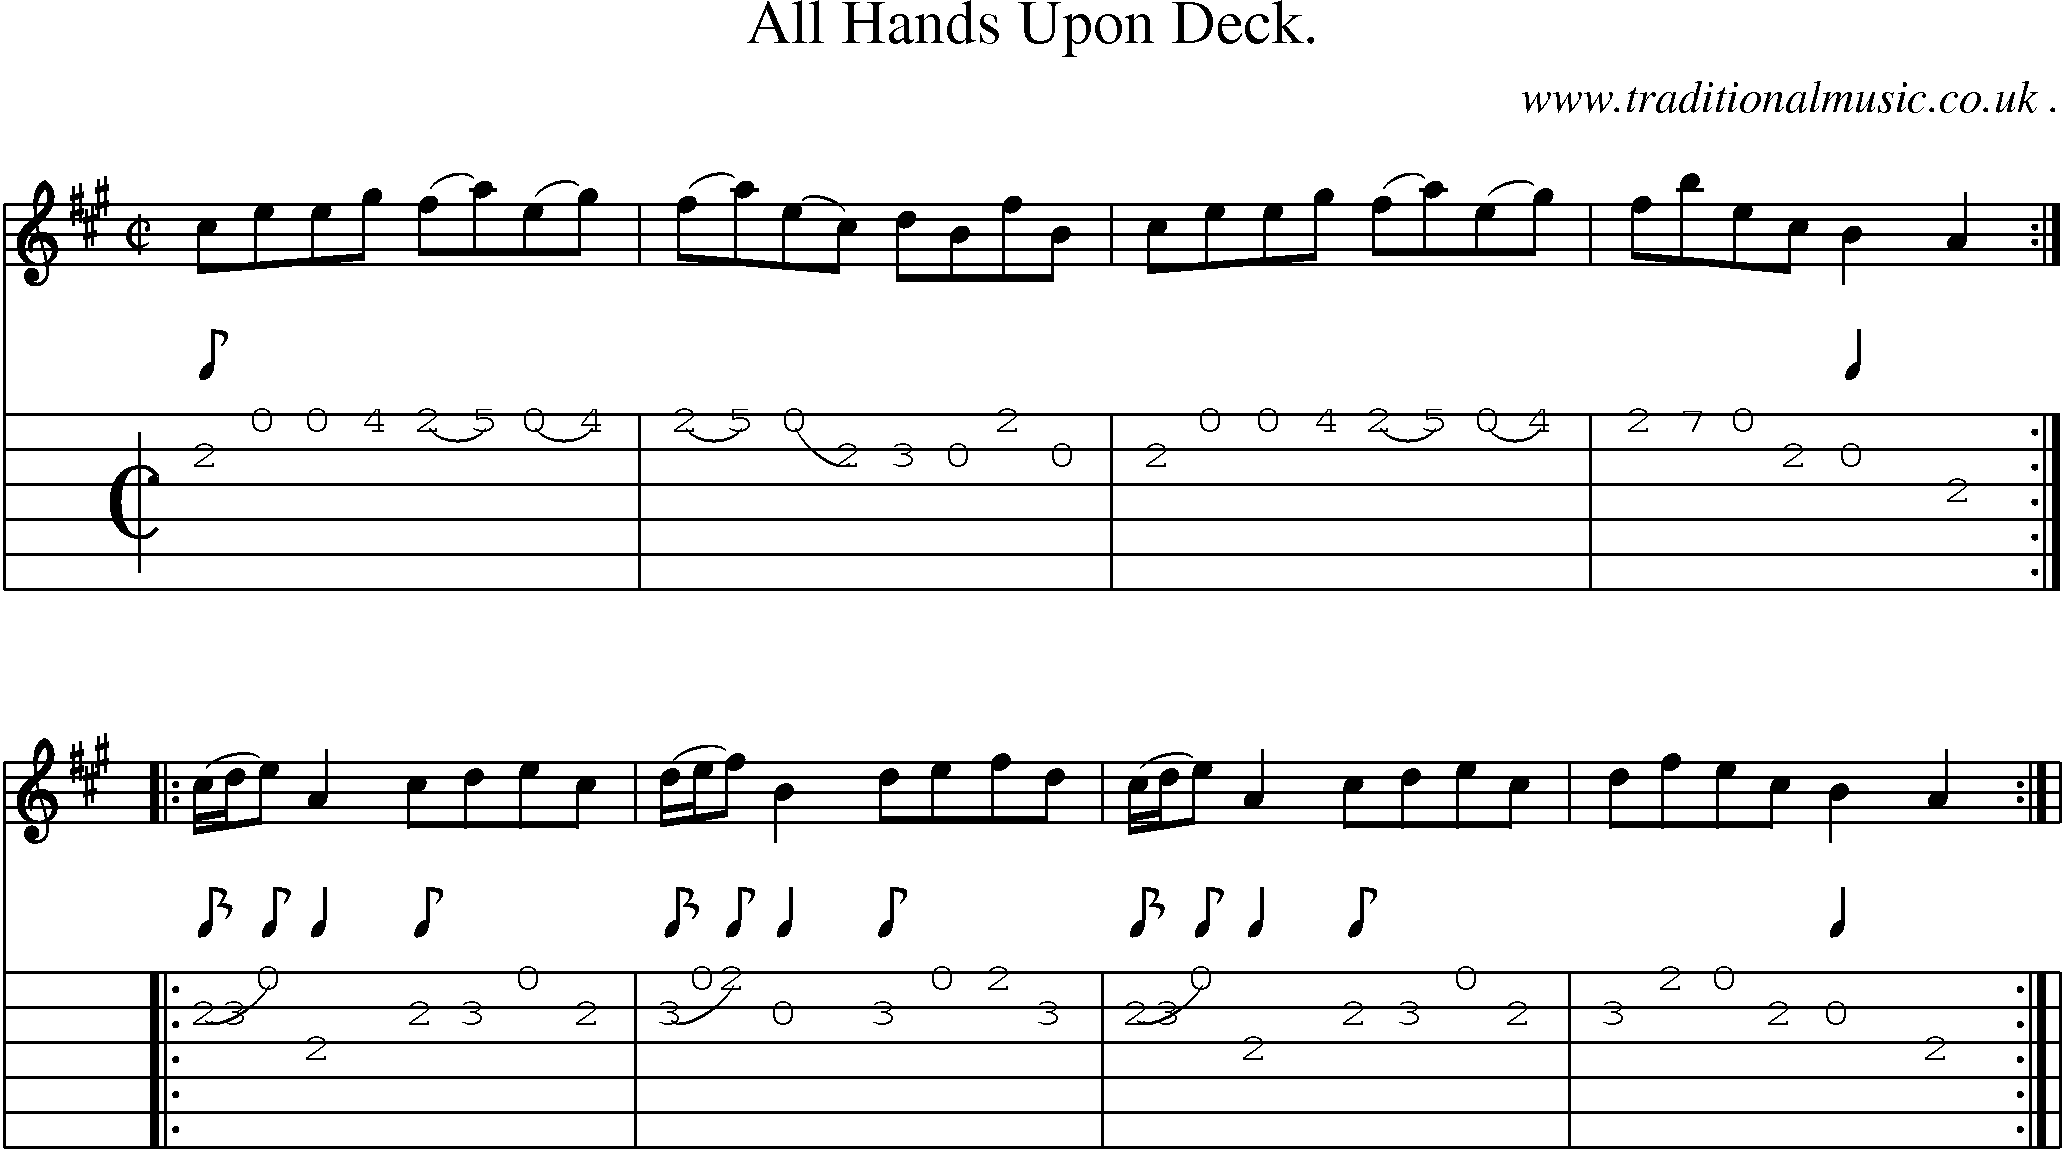 Sheet-Music and Guitar Tabs for All Hands Upon Deck